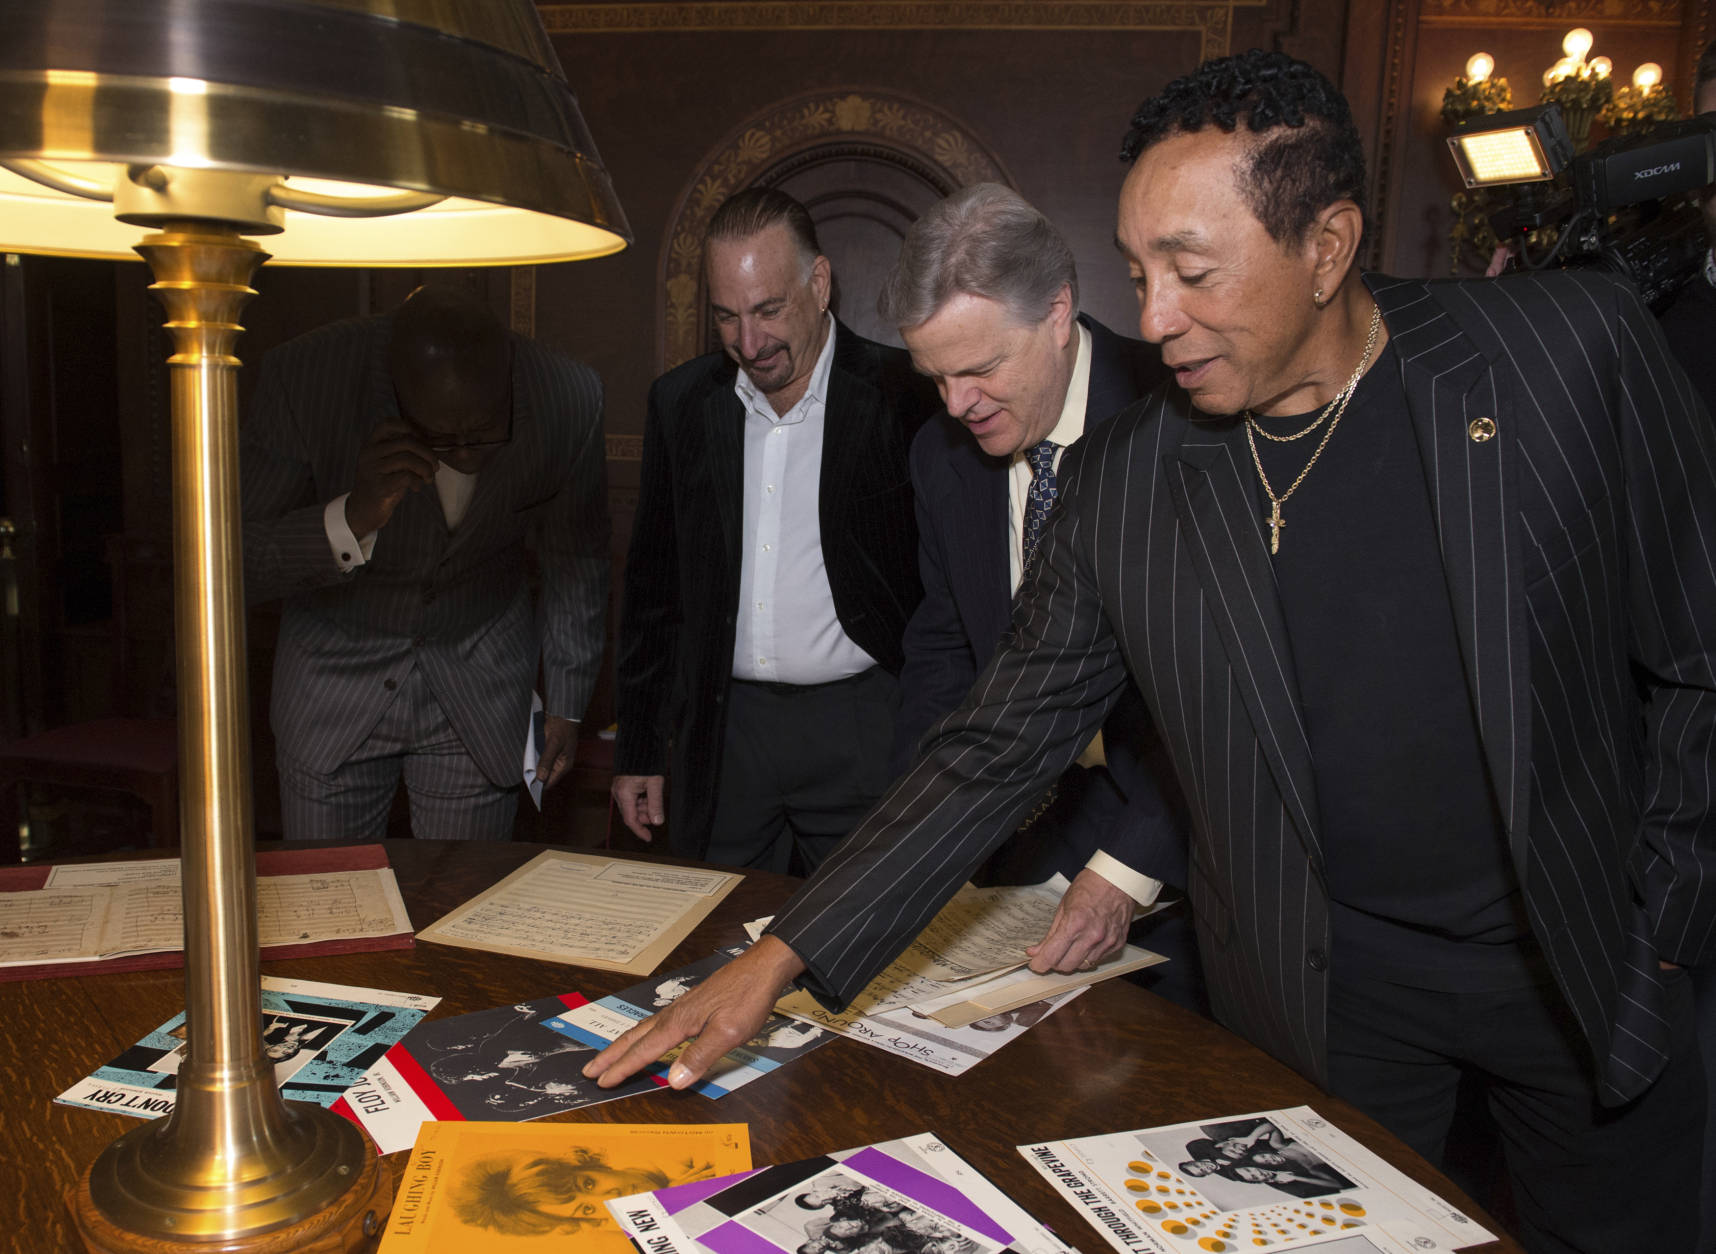 Gershwin Prize recipient Smokey Robinson looks at items in a special display with Senior Music Specialist Raymond White, center, and Robinson's music director James Demetrius Pappas, while visiting the Library of Congress in Washington, Tuesday, Nov. 15, 2016. (AP Photo/Molly Riley)